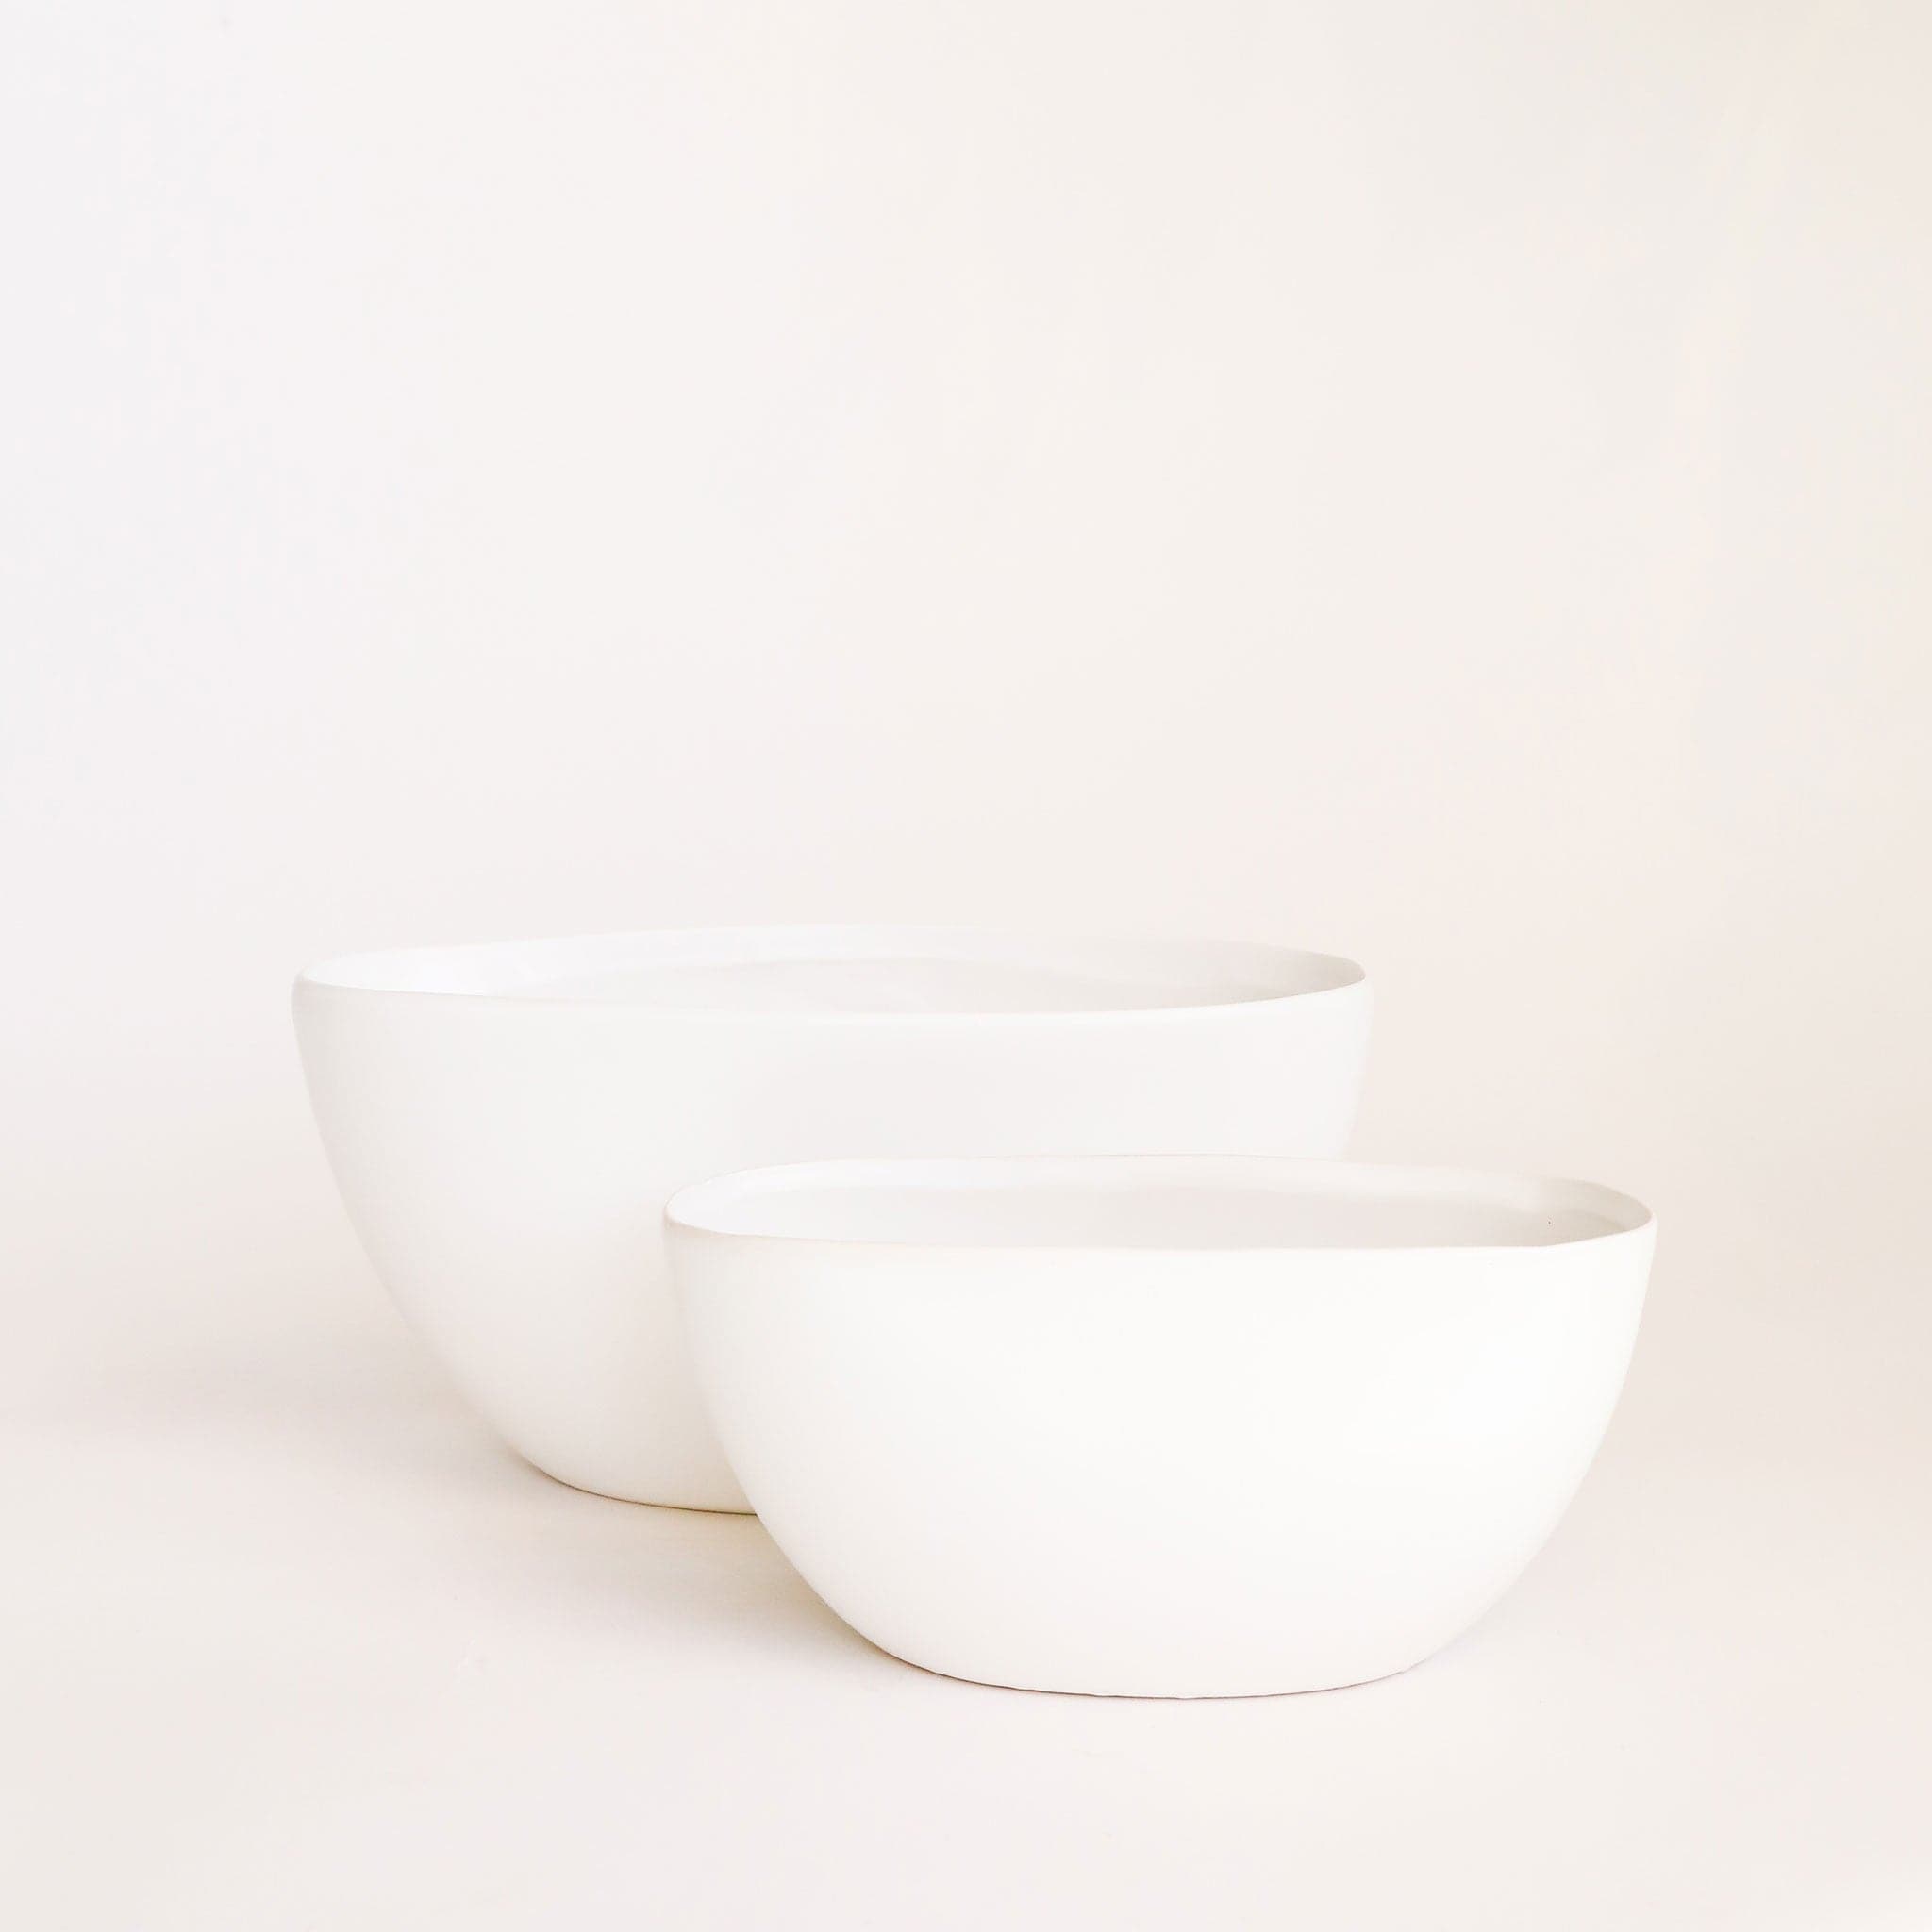 Two white ceramic boat shaped bowls are layered one in front of the other. The front bowl is smaller than the larger placed behind it. 